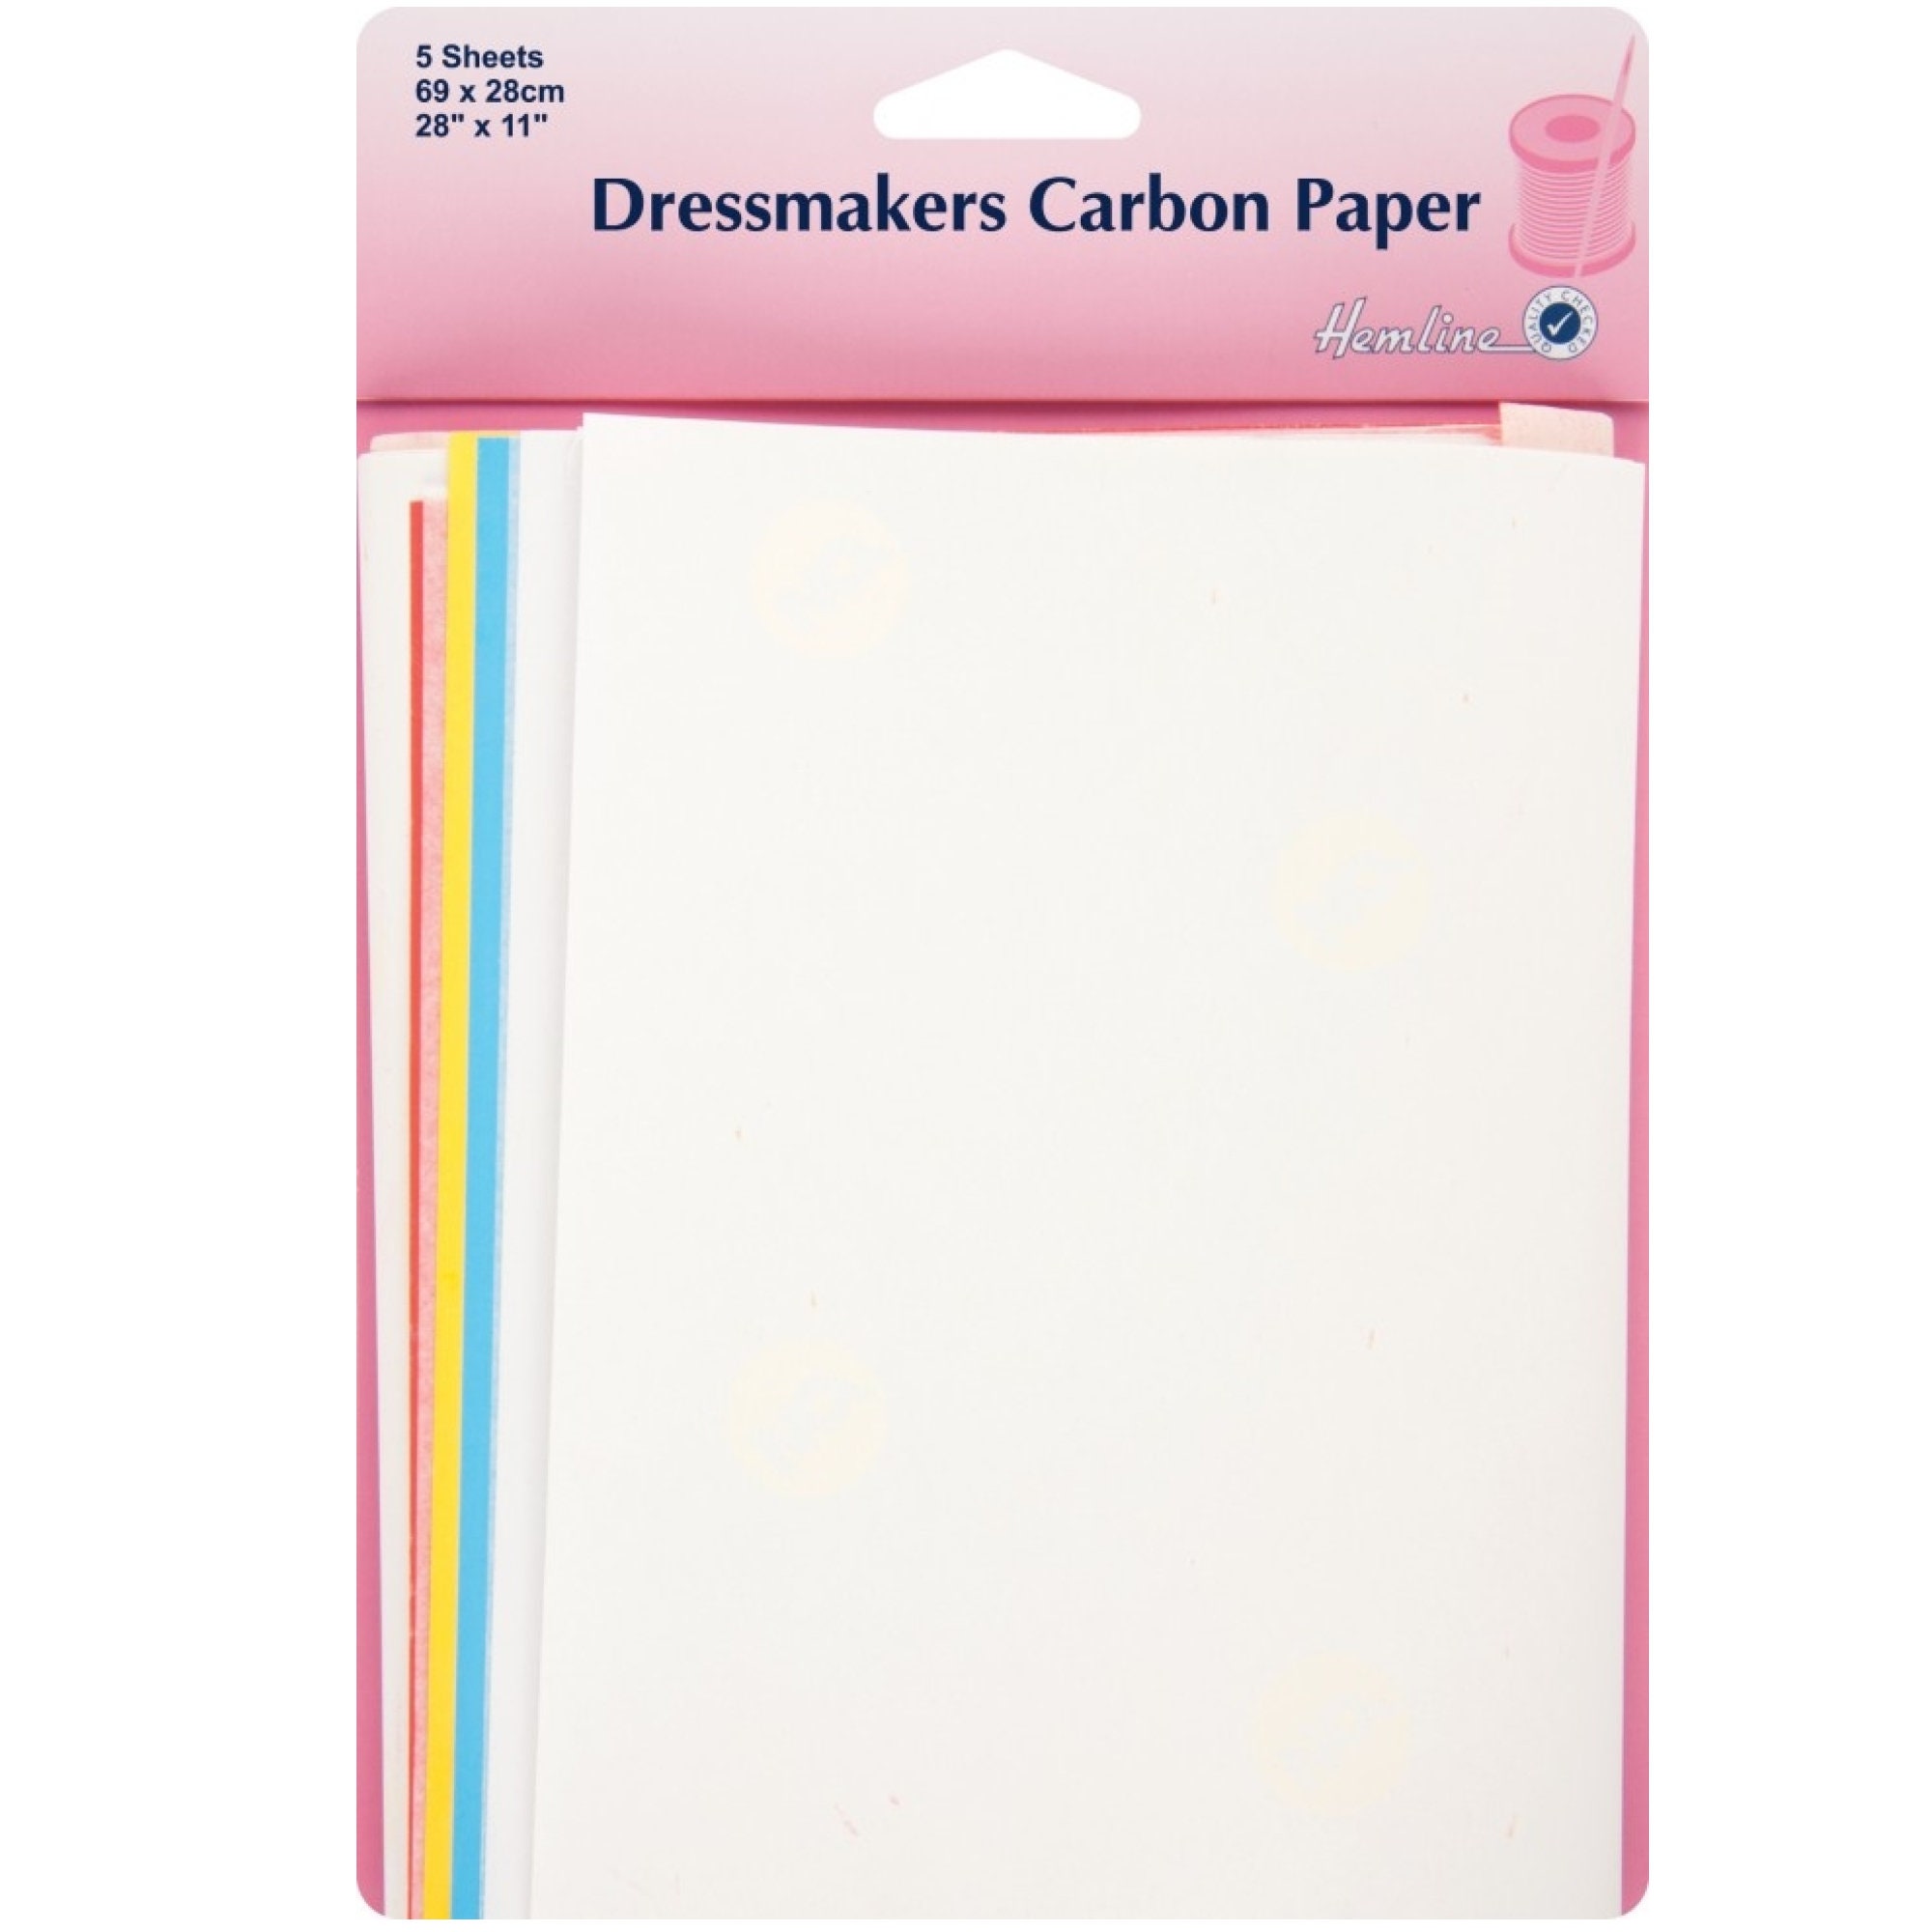 Carbon Transfer Tracing Paper for Woodworking Patterns (5 Sheets - 26 x 42 per Sheet)